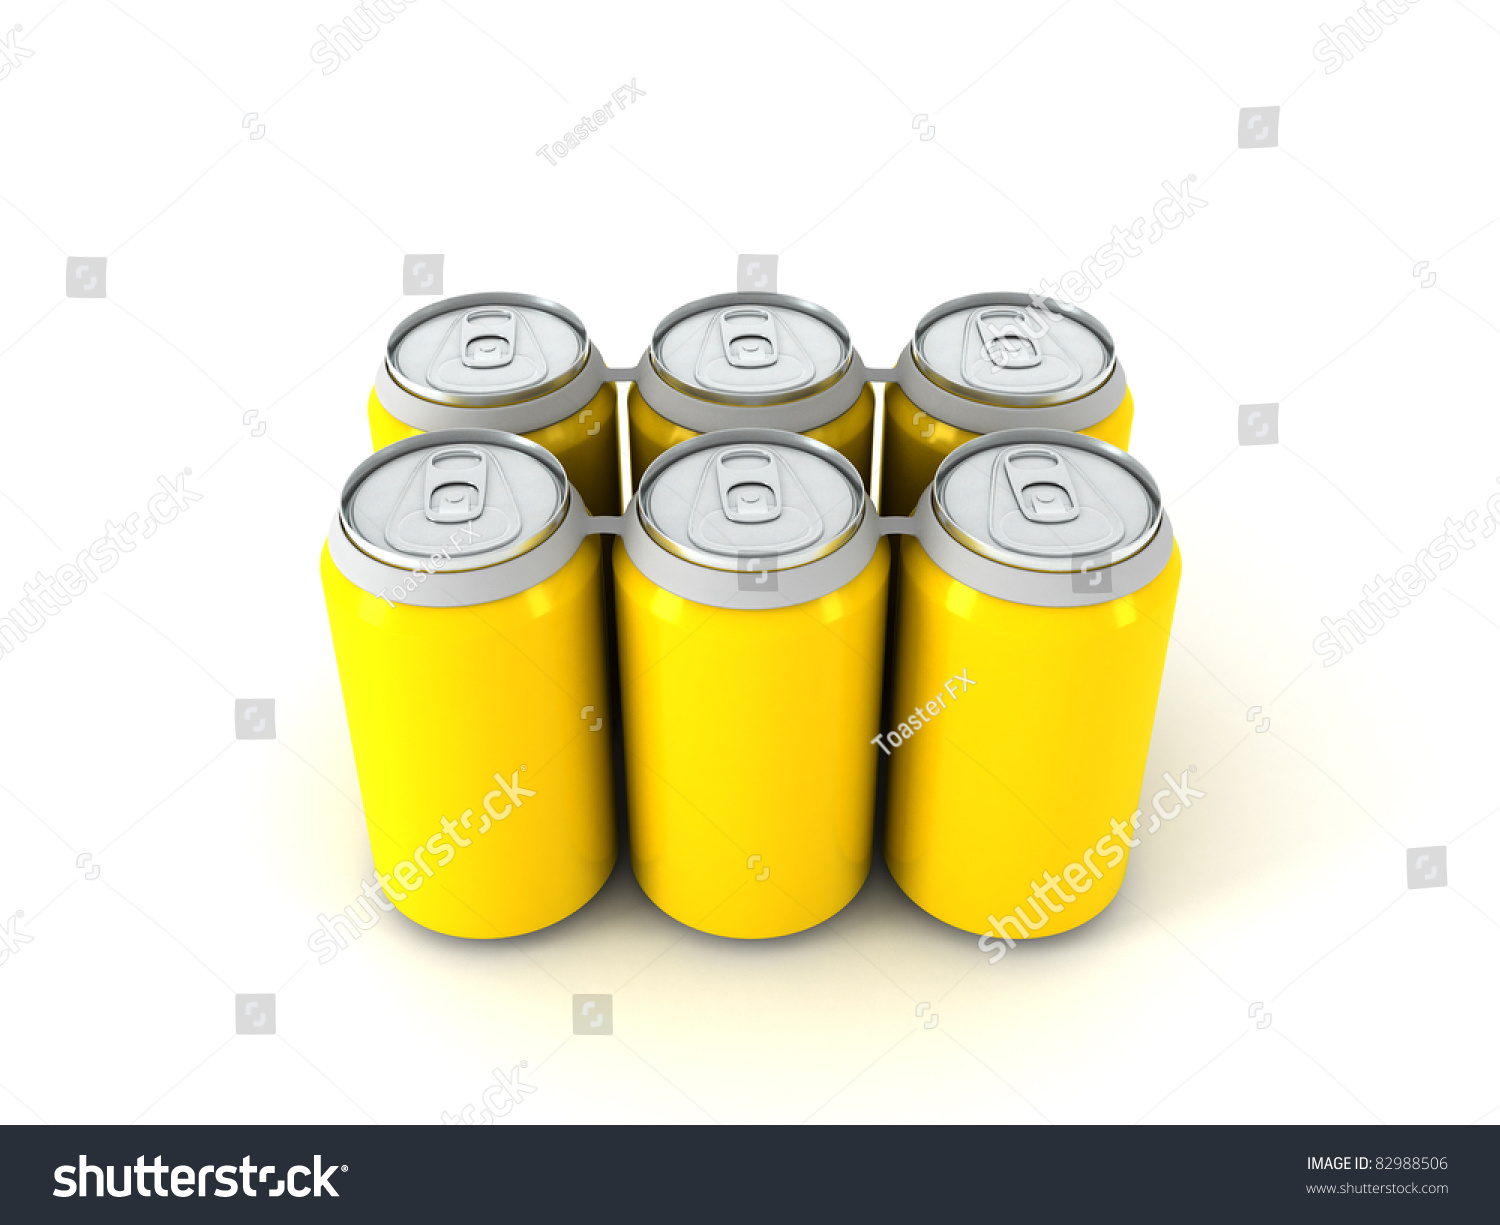 Download 3d Illustration Six Yellow Aluminum Cans Stock Image Download Now PSD Mockup Templates